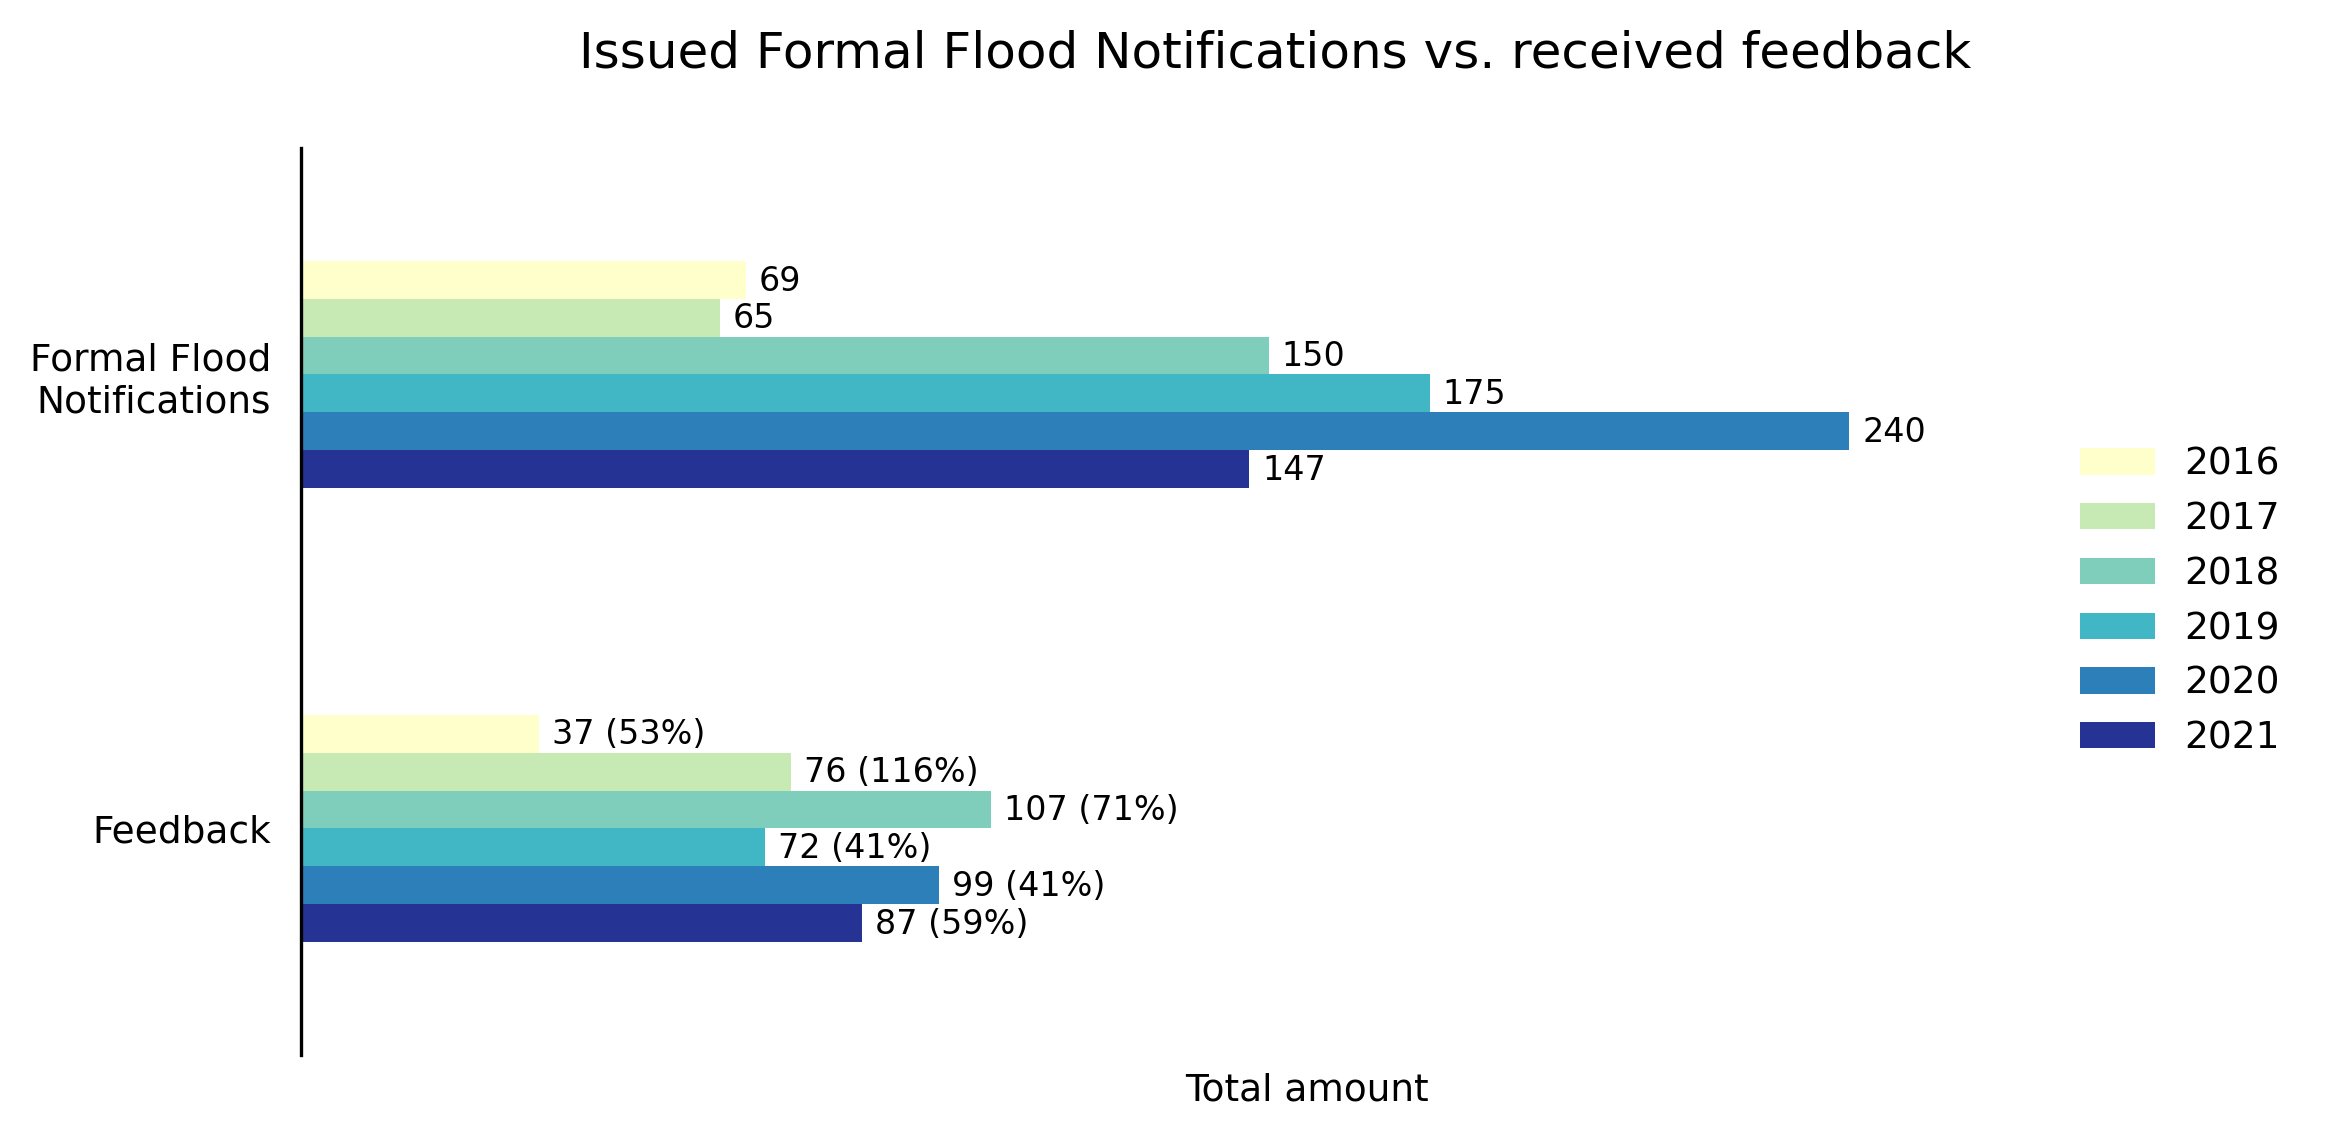 Former version of issued EFAS Formal Flood Notifications compared to feedback reports received. Note that some notifications are sent to more than one partner. For this reason, the response rate reported here may be higher than the actual value (in some cases even being above 100%, see year 2017).